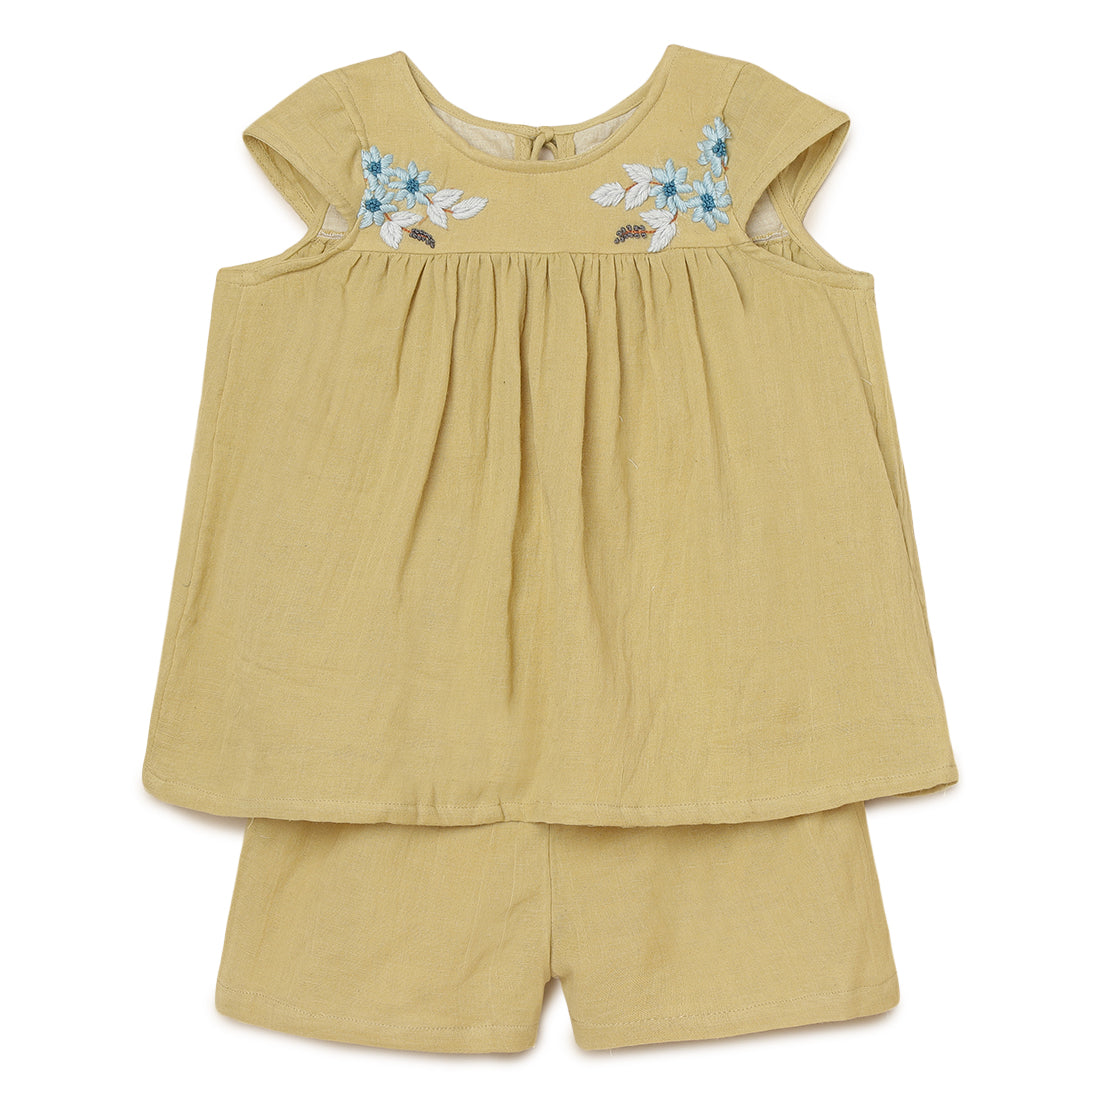 Girls Embroidered Top and Shorts - 2 yrs to 6 yrs - Full set